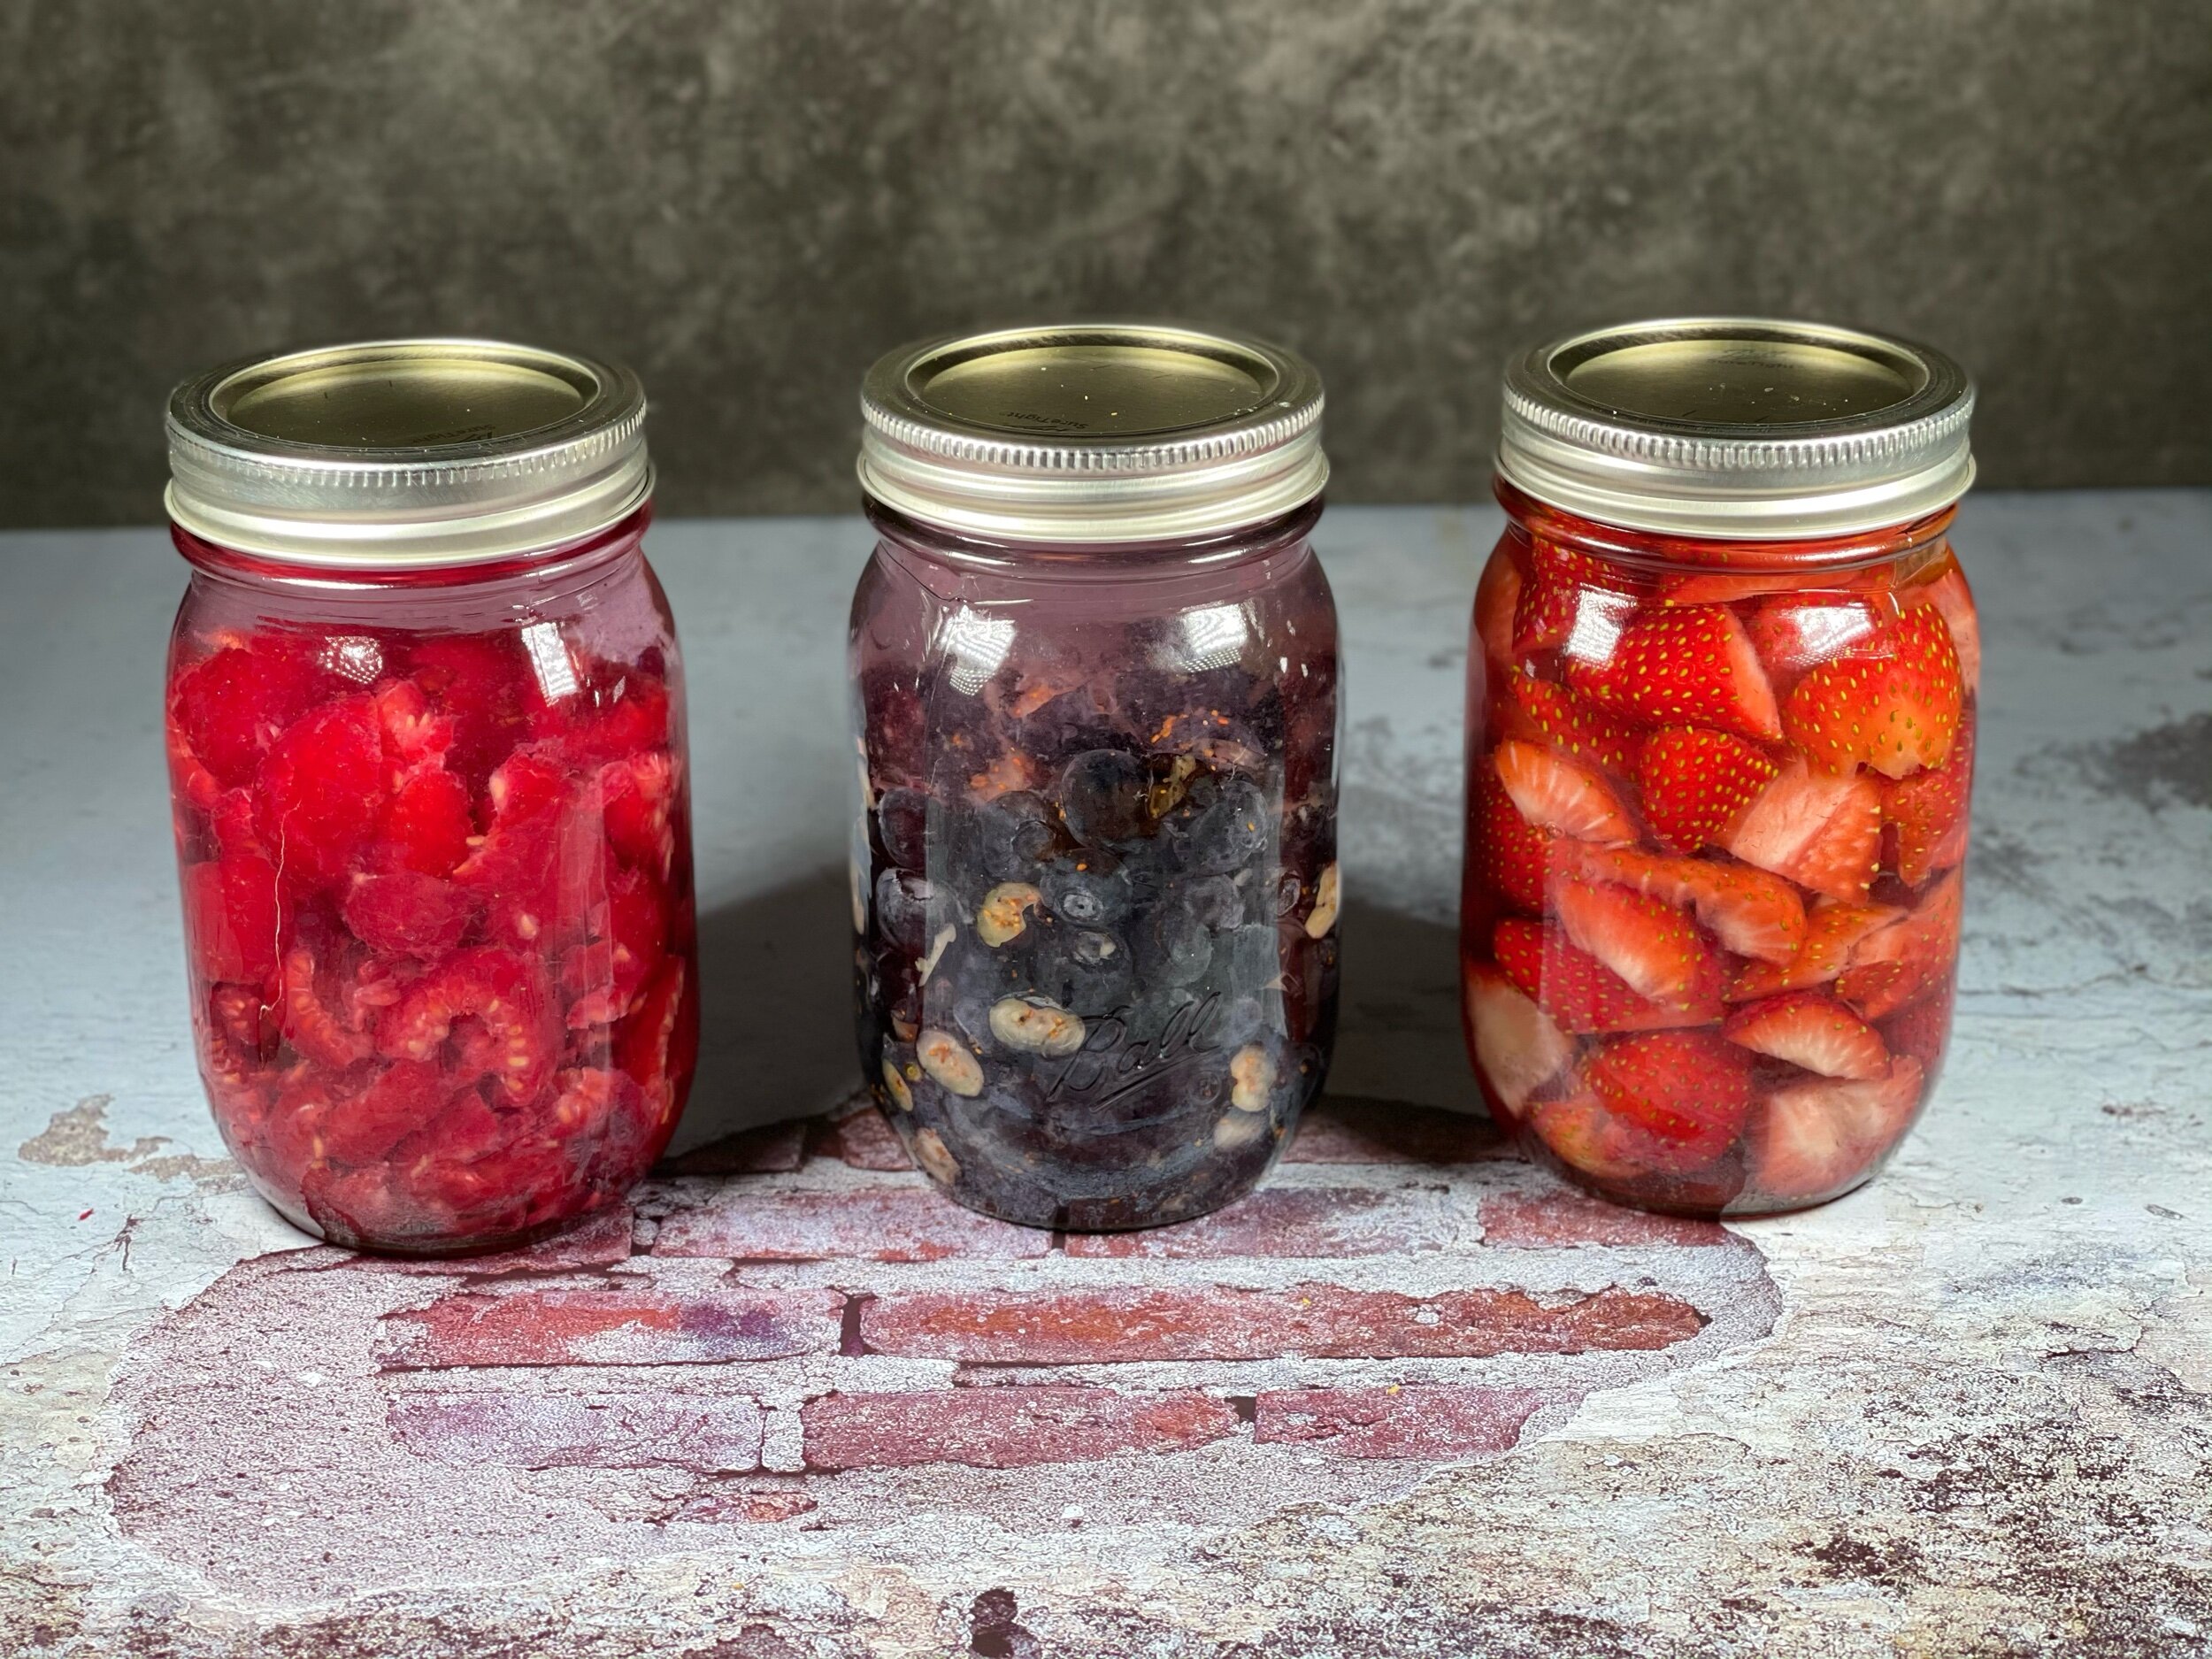  Right to left: mason jars of raspberries, blueberries, and strawberries, all filed with vodka and capped with metal canning lids and rings. 